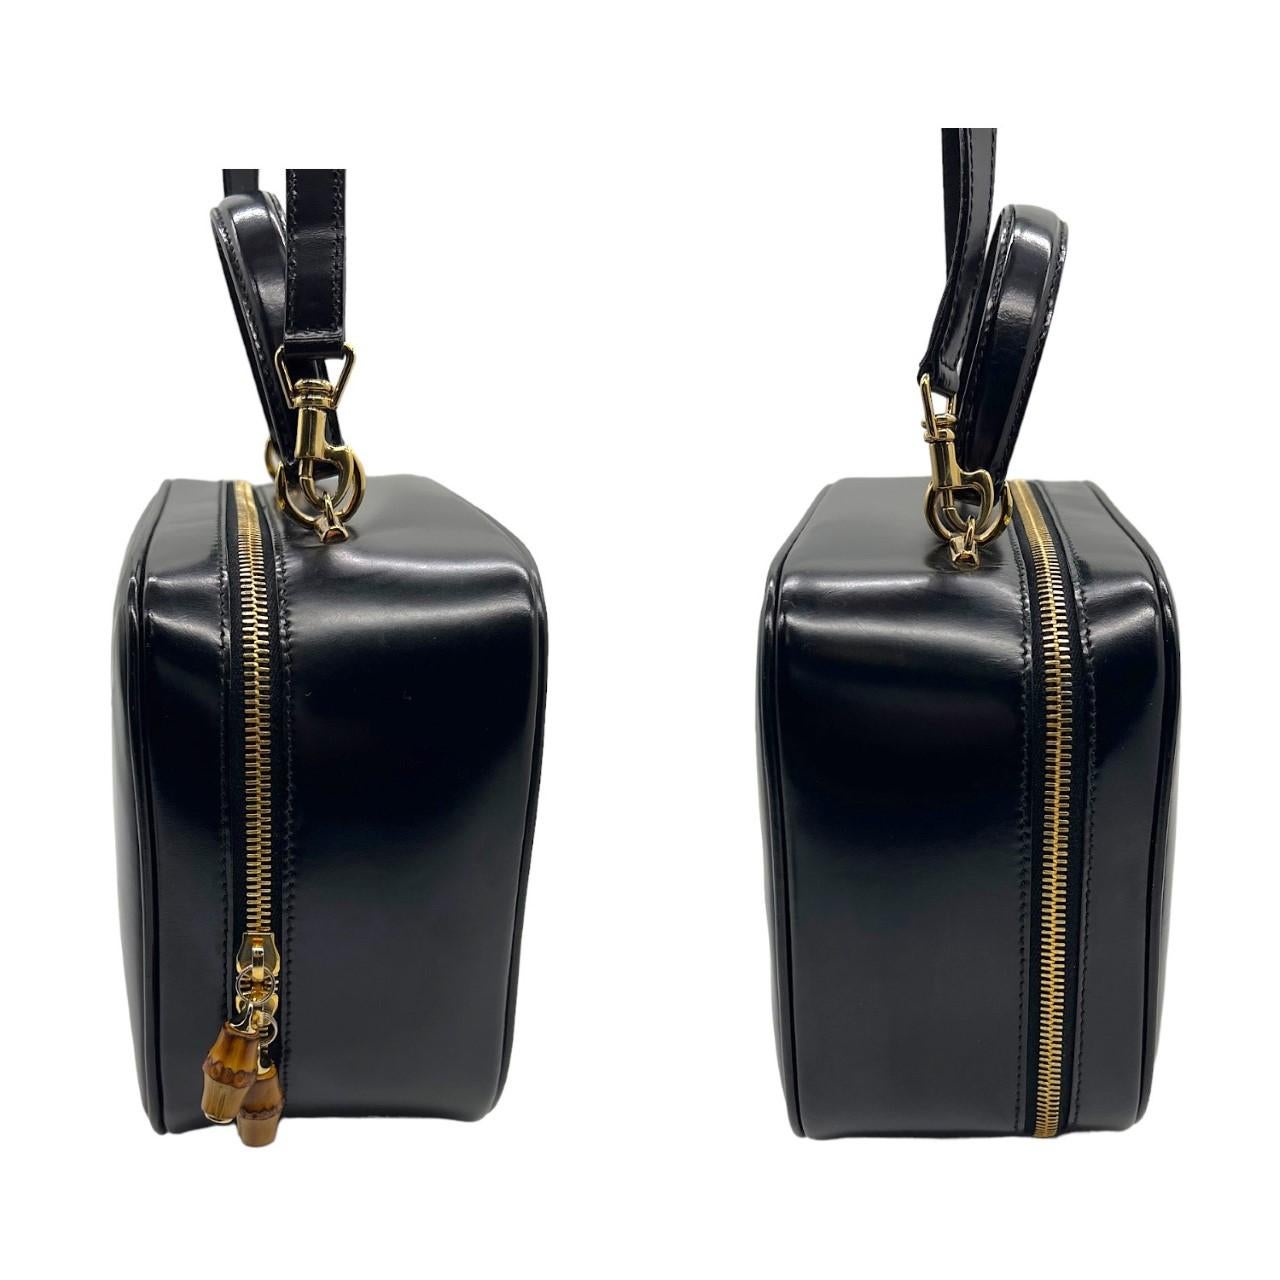 We are offering this beautiful Gucci vanity case. Made in Italy, this case is made with a black leather exterior with a removeable black leather shoulder strap and a gold-tone hardware zip up closure. It features bamboo detailed zipper pulls and it